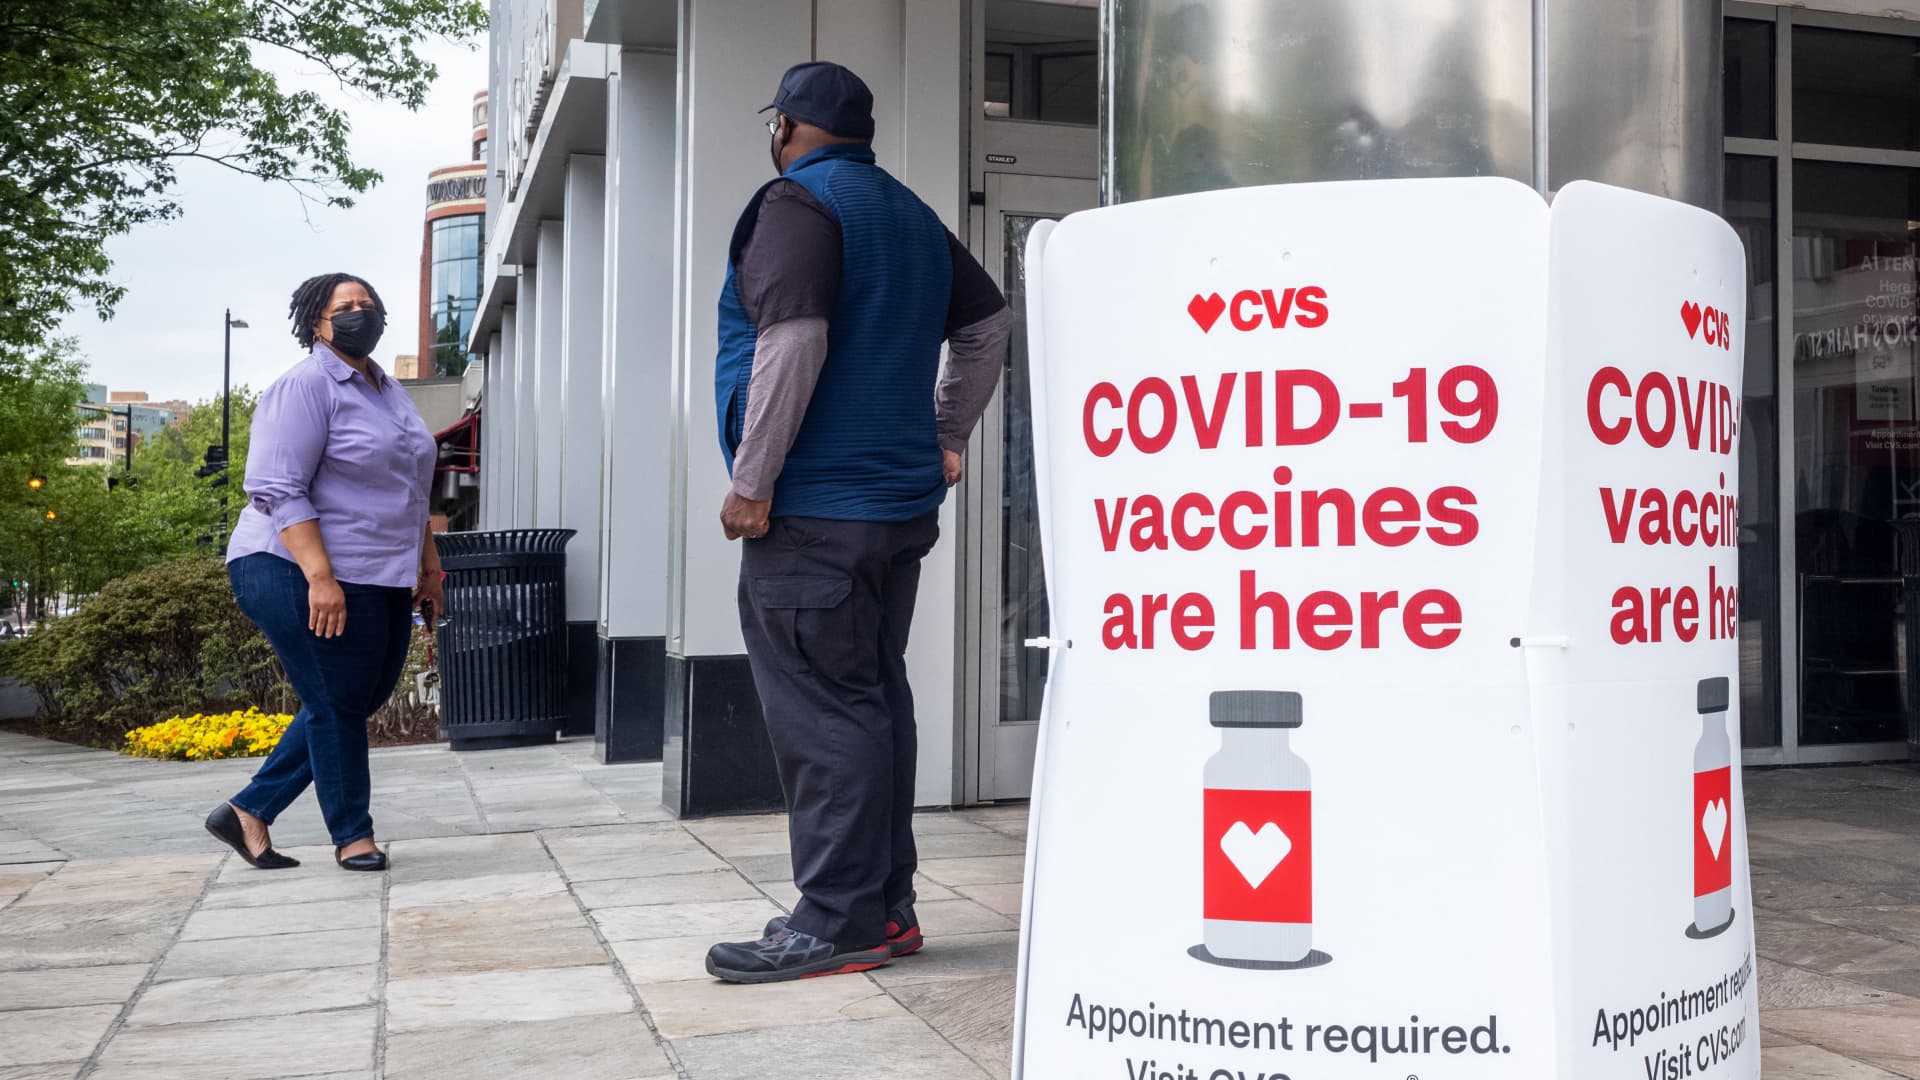 Signs offering COVID-19 vaccinations are seen outside of a CVS pharmacy in Washington, DC on May 7, 2021.